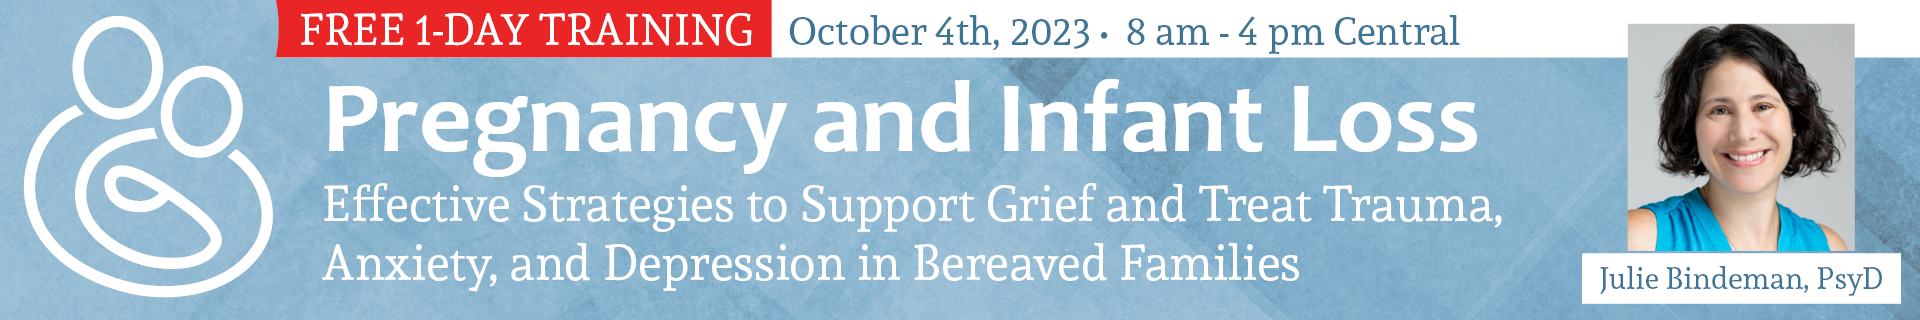 FREE LIVE EVENT! | Pregnancy and Infant Loss: Effective Strategies to Support Grief and Treat Trauma, Anxiety, and Depression in Bereaved Families